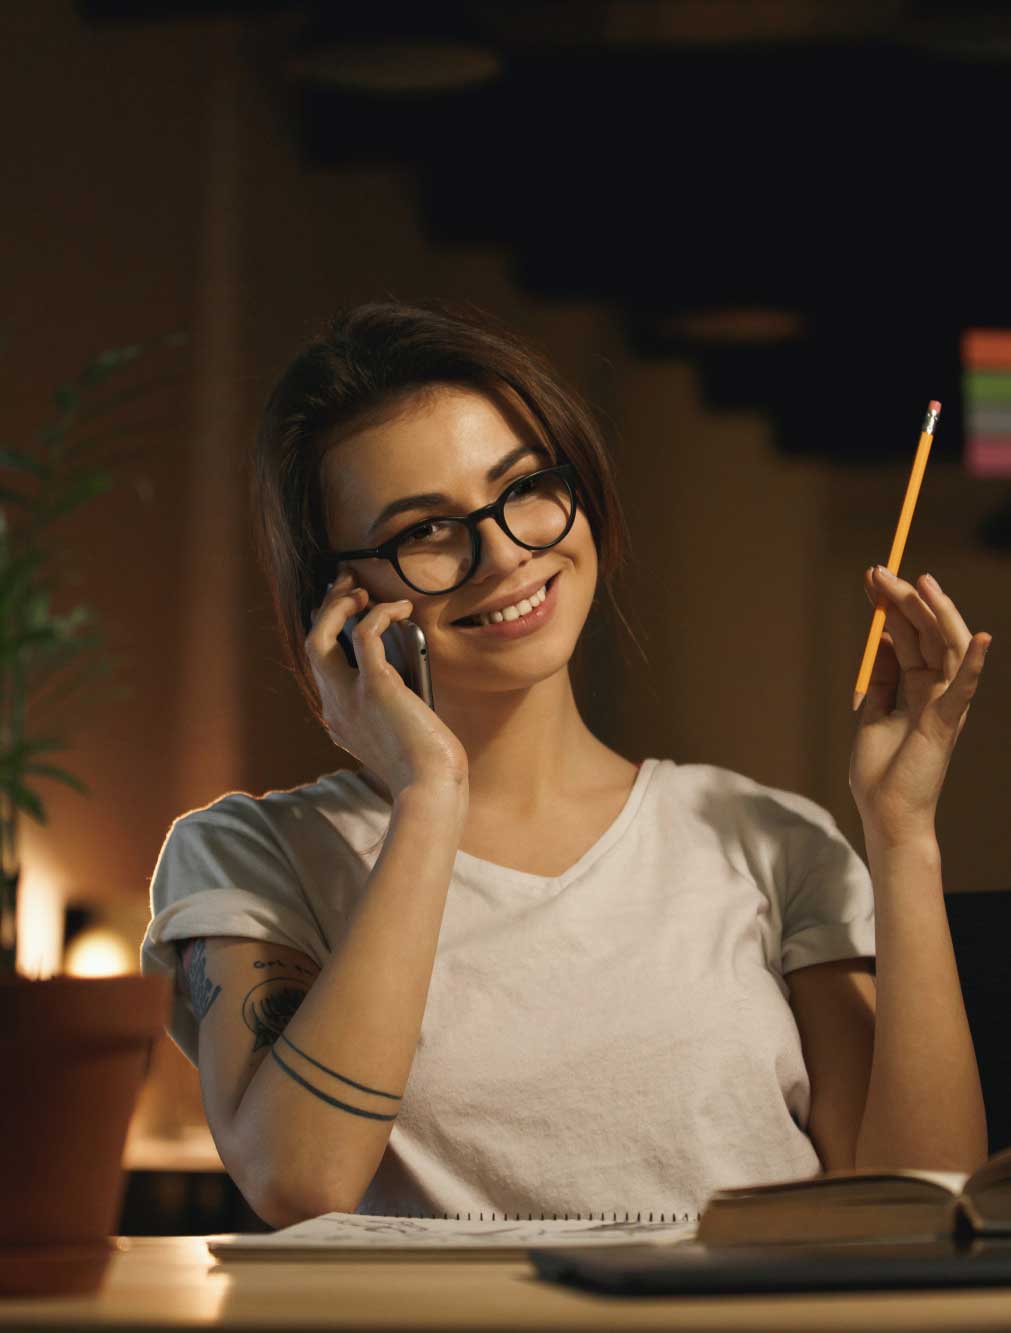 A smiling woman with glasses, holding a pencil and talking on the phone, sits by her desk illuminated by a lamp in a dimly lit room.